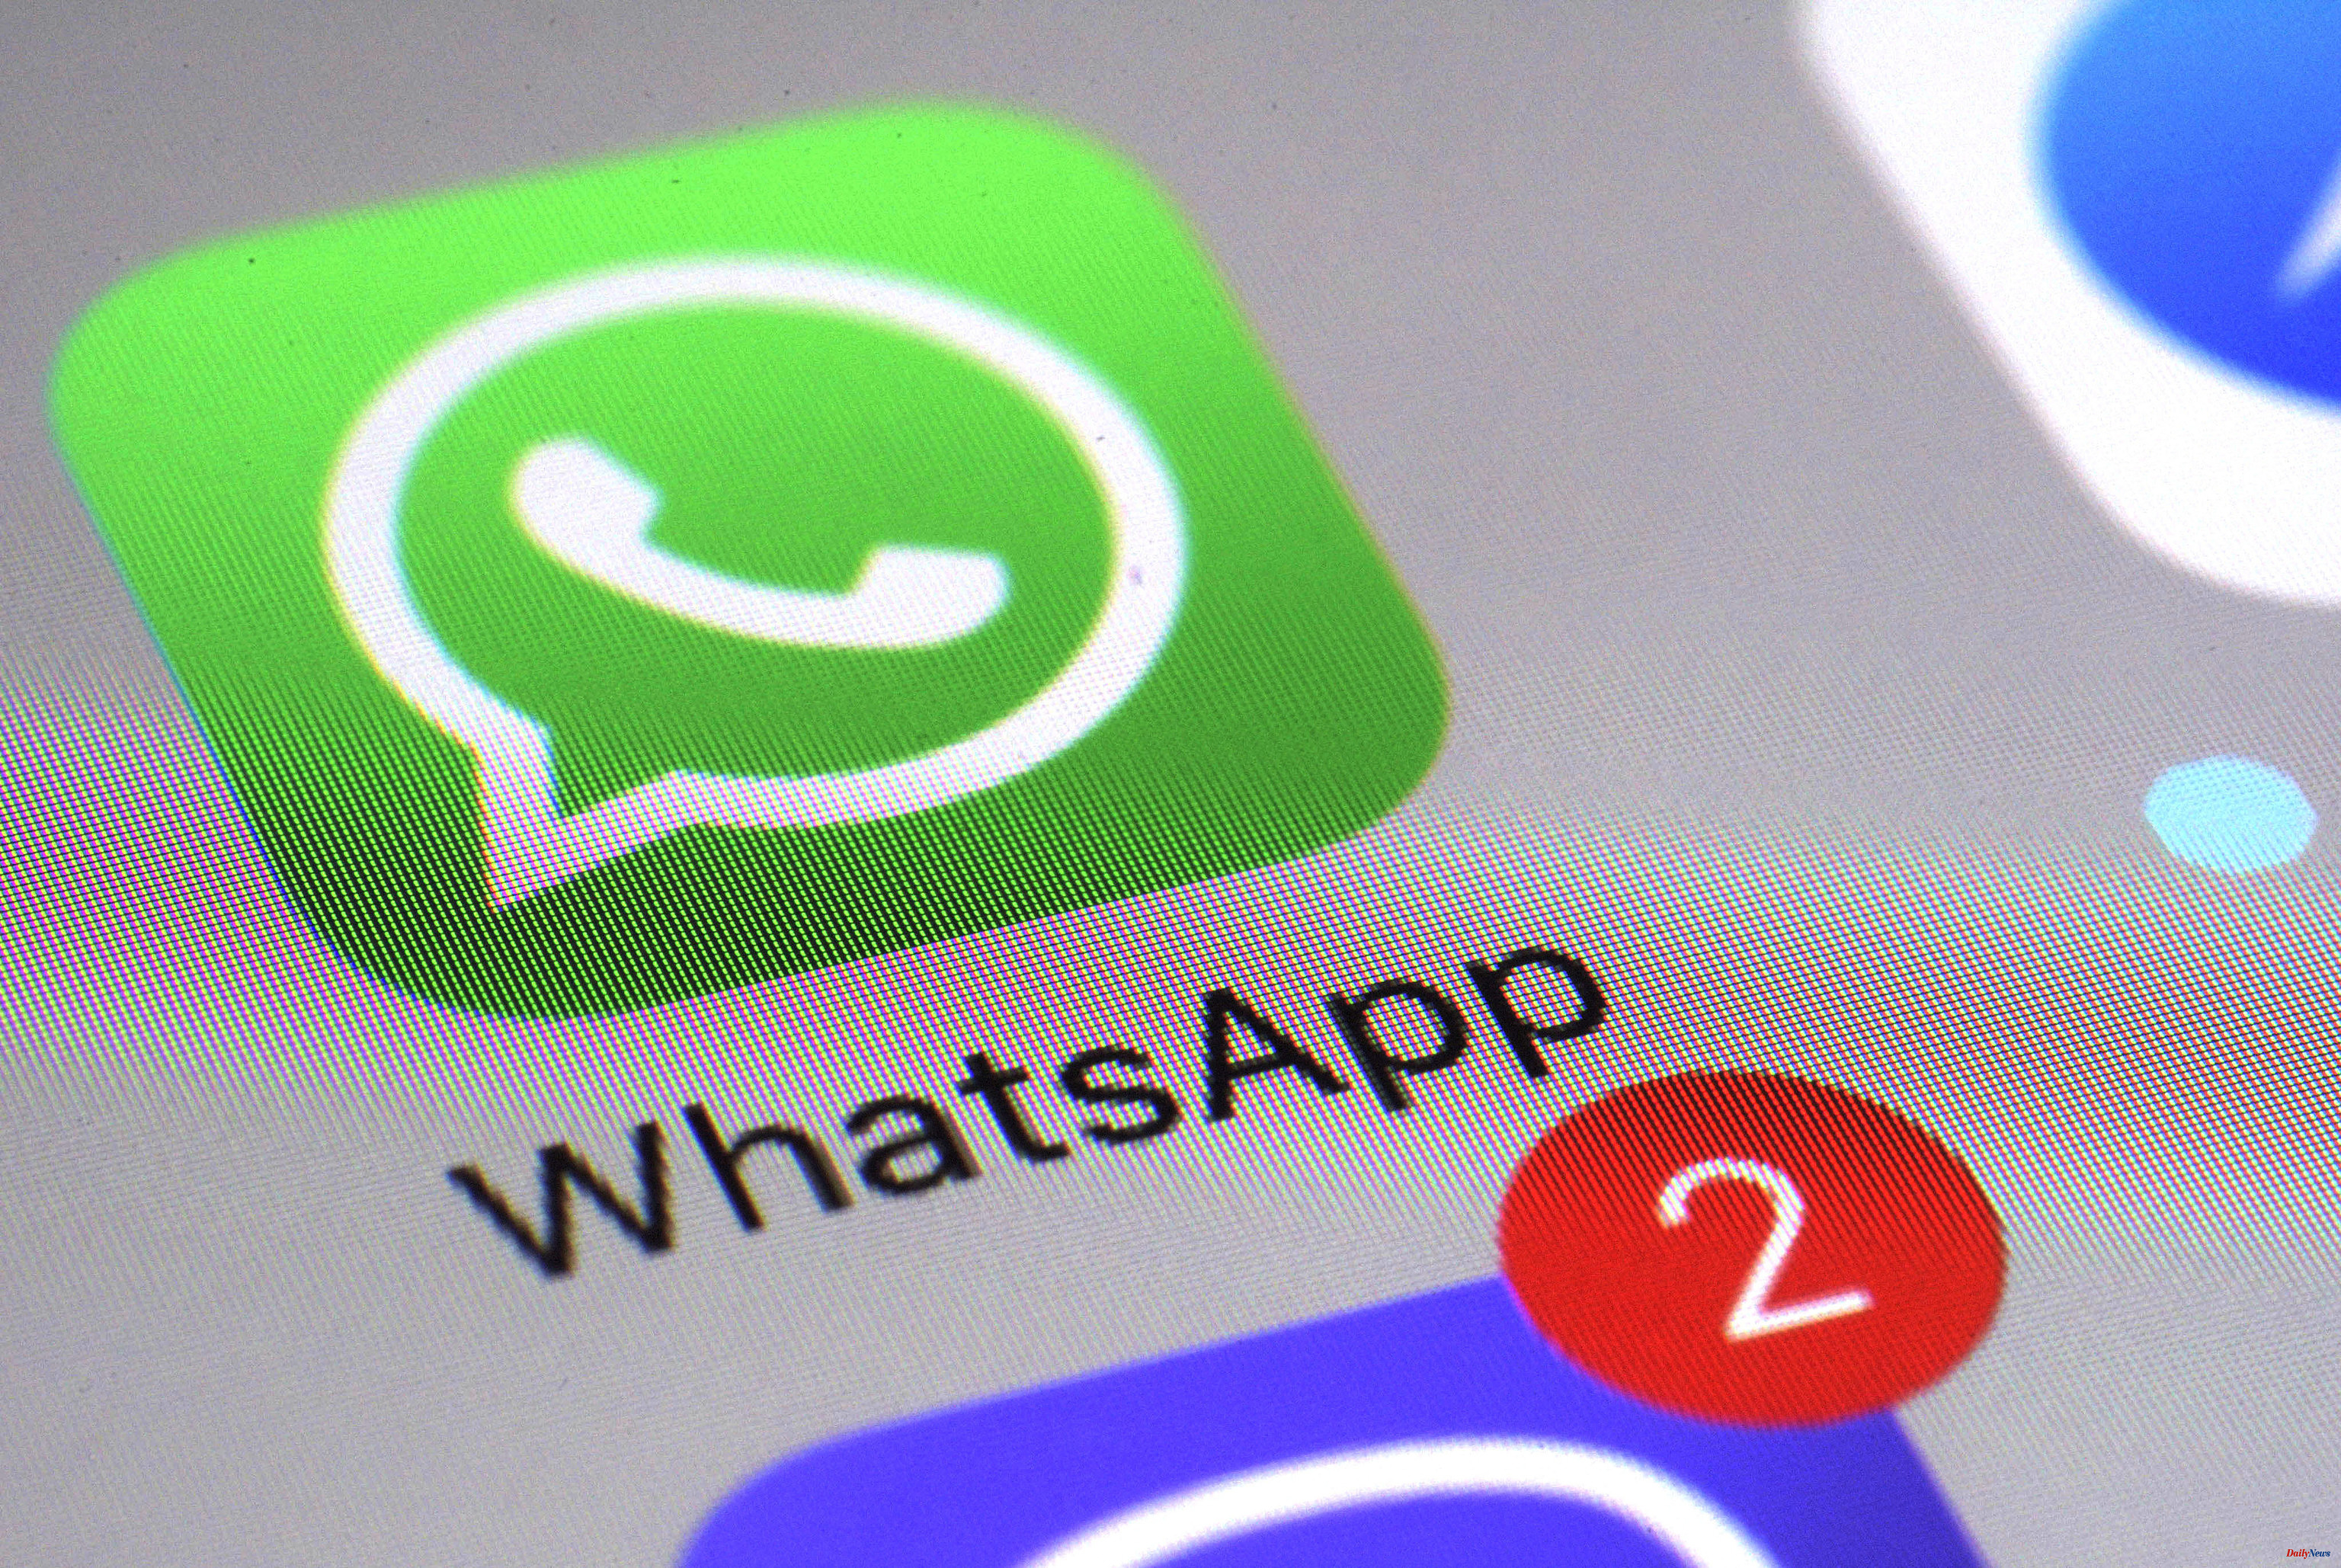 WhatsApp technology now allows you to edit sent messages